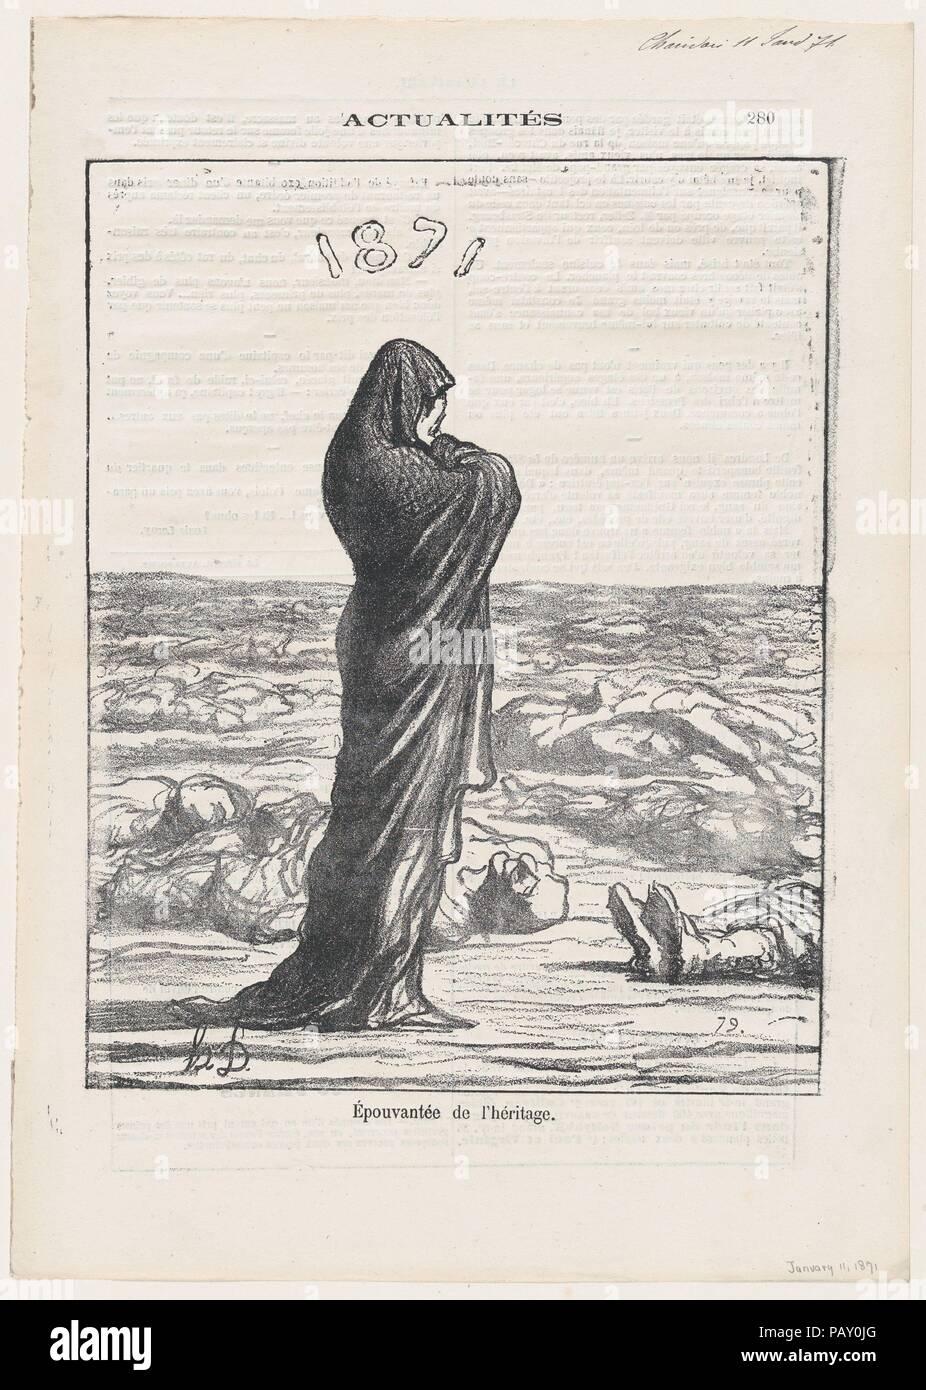 Dismayed with her legacy, from 'News of the day,' published in Le Charivari, January 11, 1871. Artist: Honoré Daumier (French, Marseilles 1808-1879 Valmondois). Dimensions: Image: 9 1/8 × 7 1/8 in. (23.1 × 18.1 cm)  Sheet: 12 1/4 × 8 3/4 in. (31.1 × 22.2 cm). Series/Portfolio: 'News of the day' (Actualités). Date: January 11, 1871. Museum: Metropolitan Museum of Art, New York, USA. Stock Photo